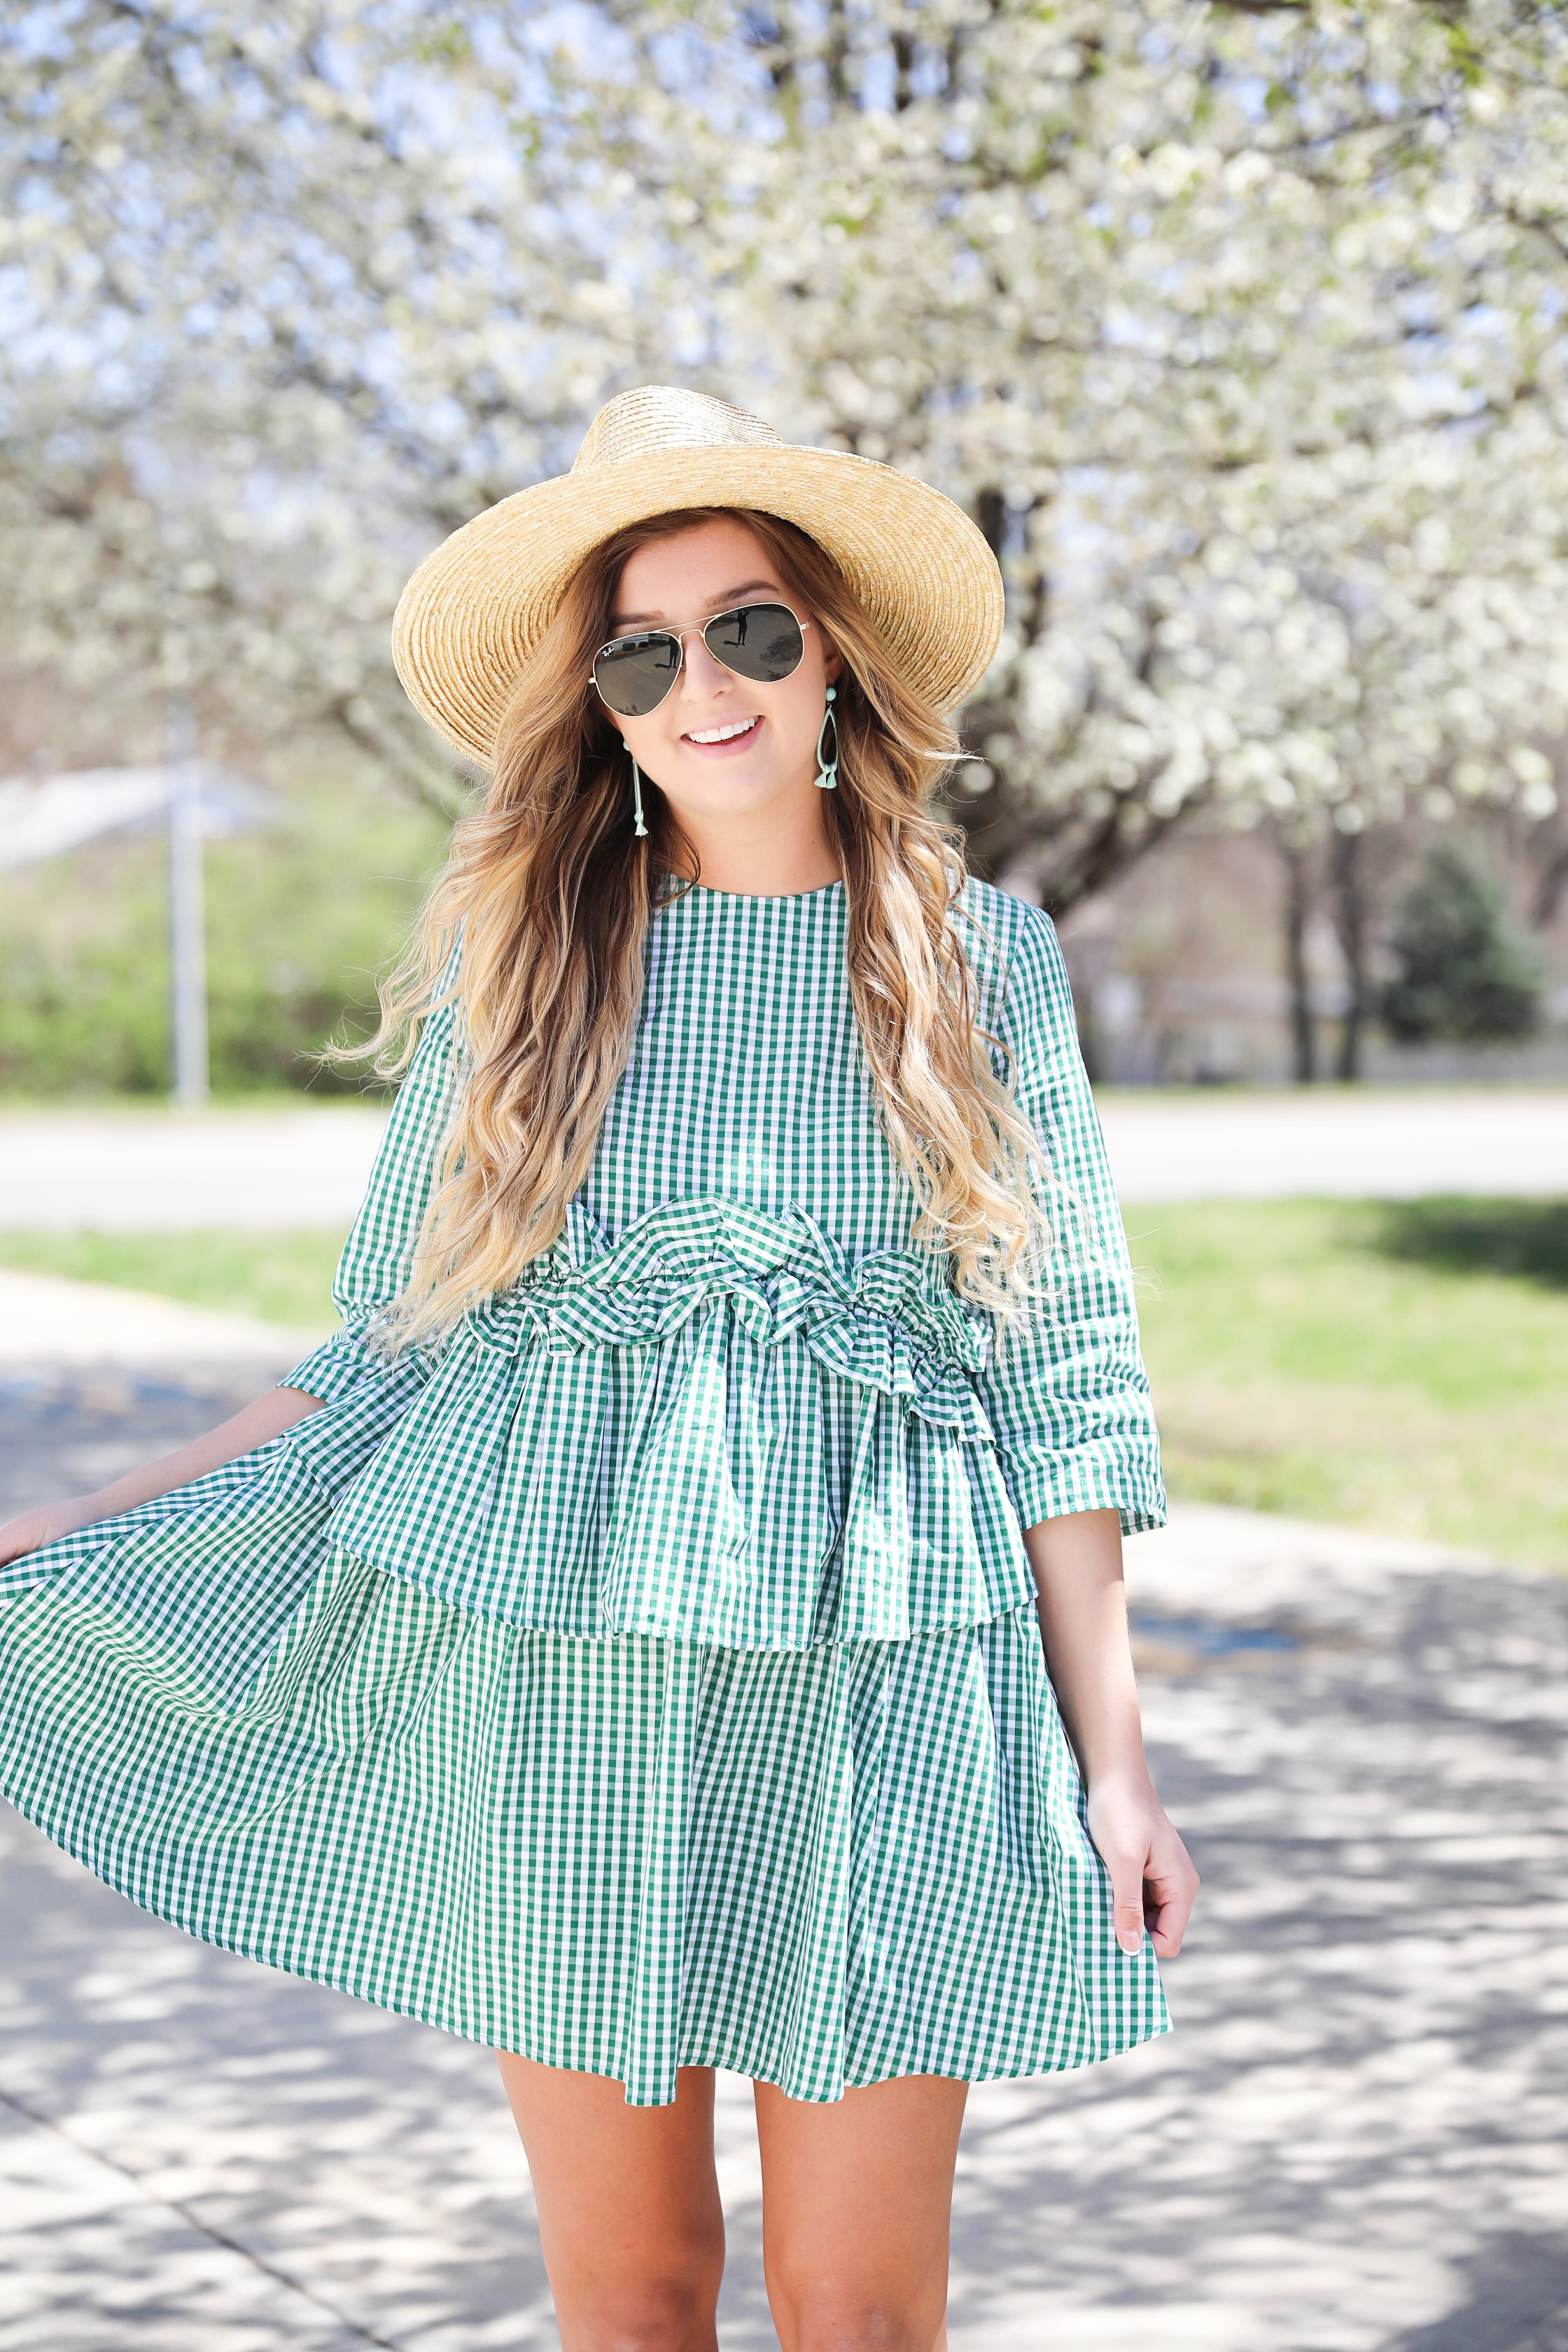 Green gingham dress perfect for spring days or days on the beach! I paired it with a straw hat and blue earrings! The most beautiful spring blooming trees were in the background making this spring fashion look perfection! Details on fashion blog daily dose of charm by lauren lindmark